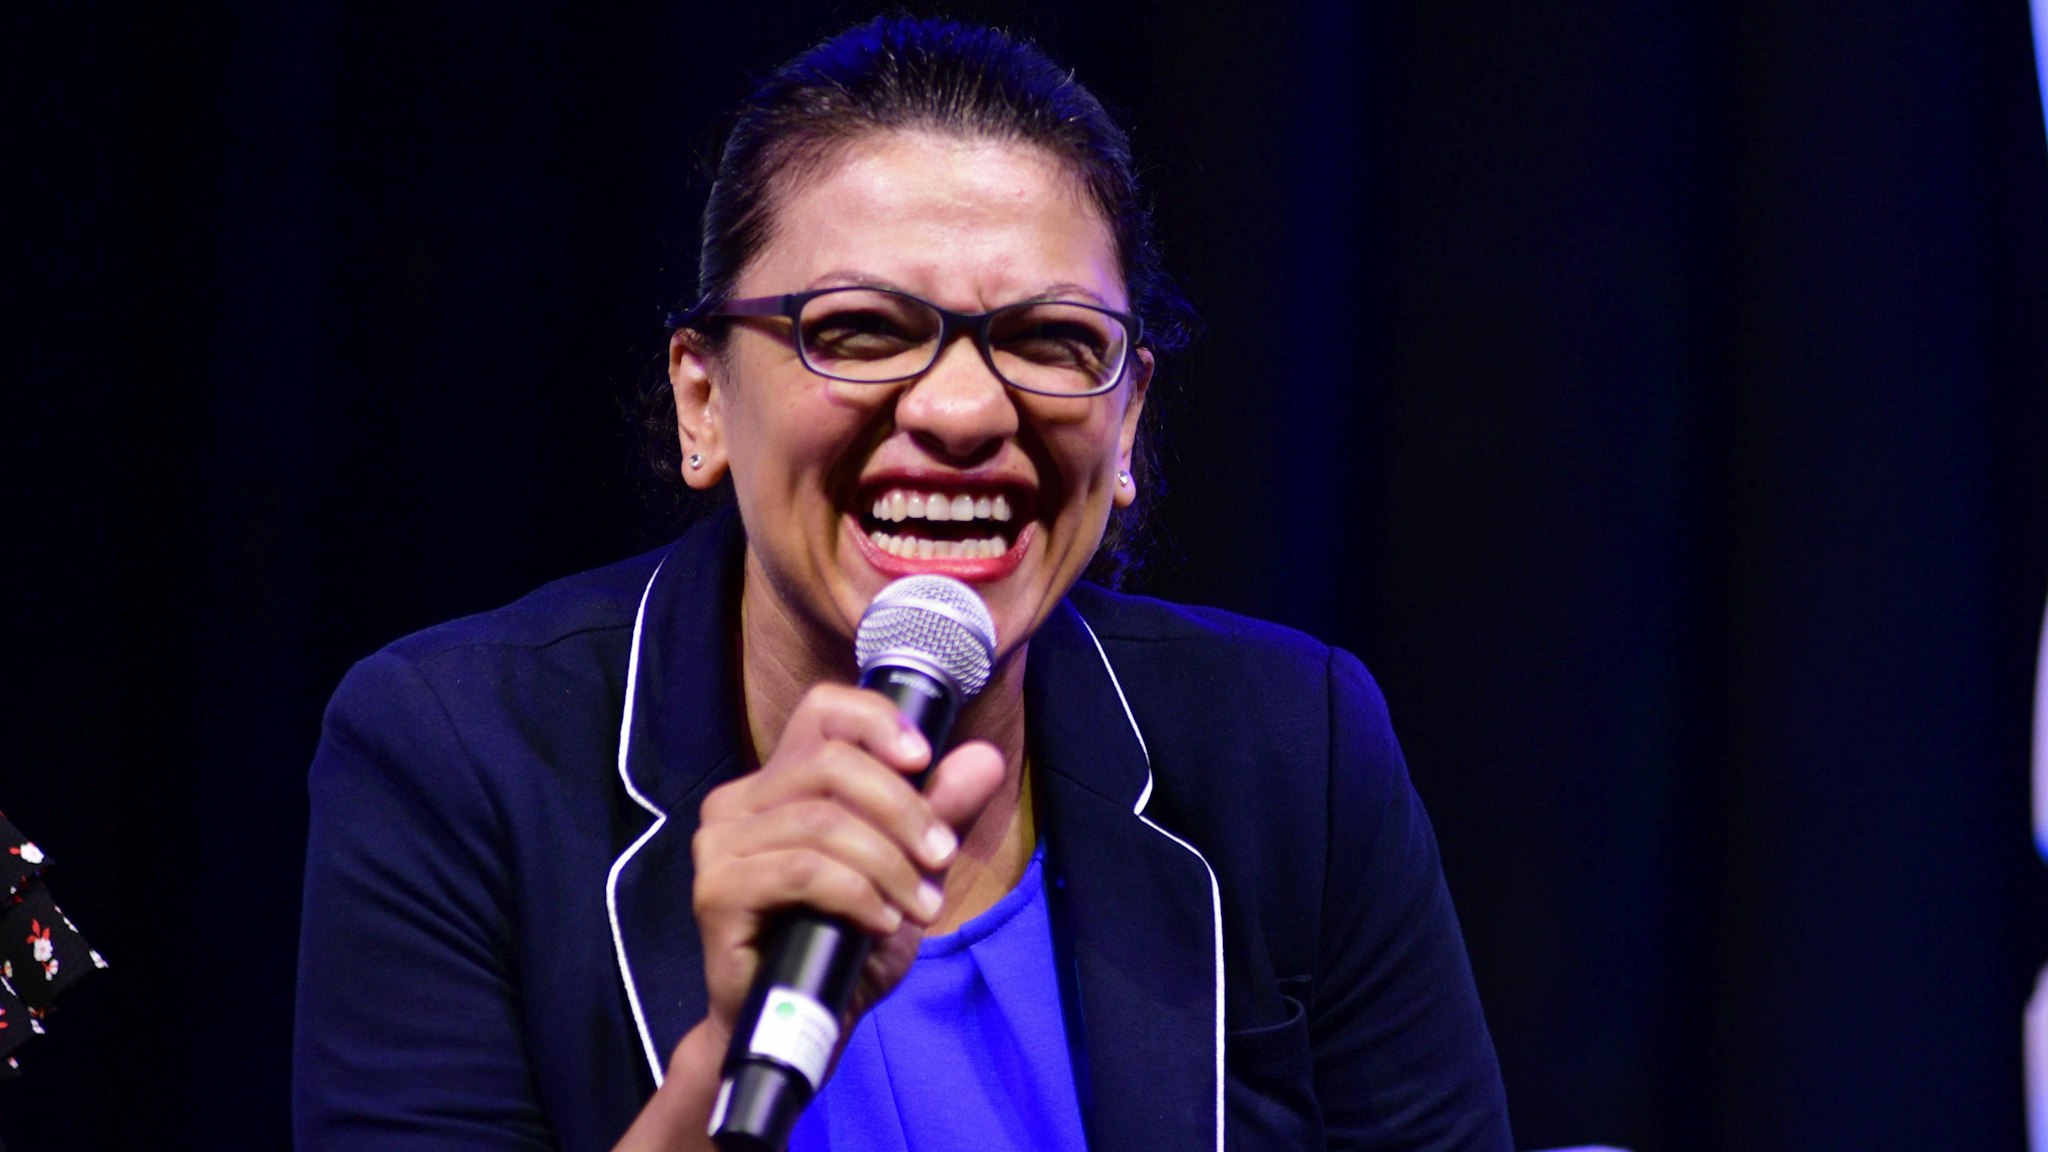 Rep. Rashida Tlaib (D-MI) speaks on the current political climate and possible impeachment of the current President during a panel discussion led by Aimee Allison, touching the changes of the face of power in the United States after a history making number of diverse members were sworn into Congress the past elections, during a keynote discussion of the Netroots Nation progressive grassroots convention in Philadelphia, PA, on July 13, 2019.